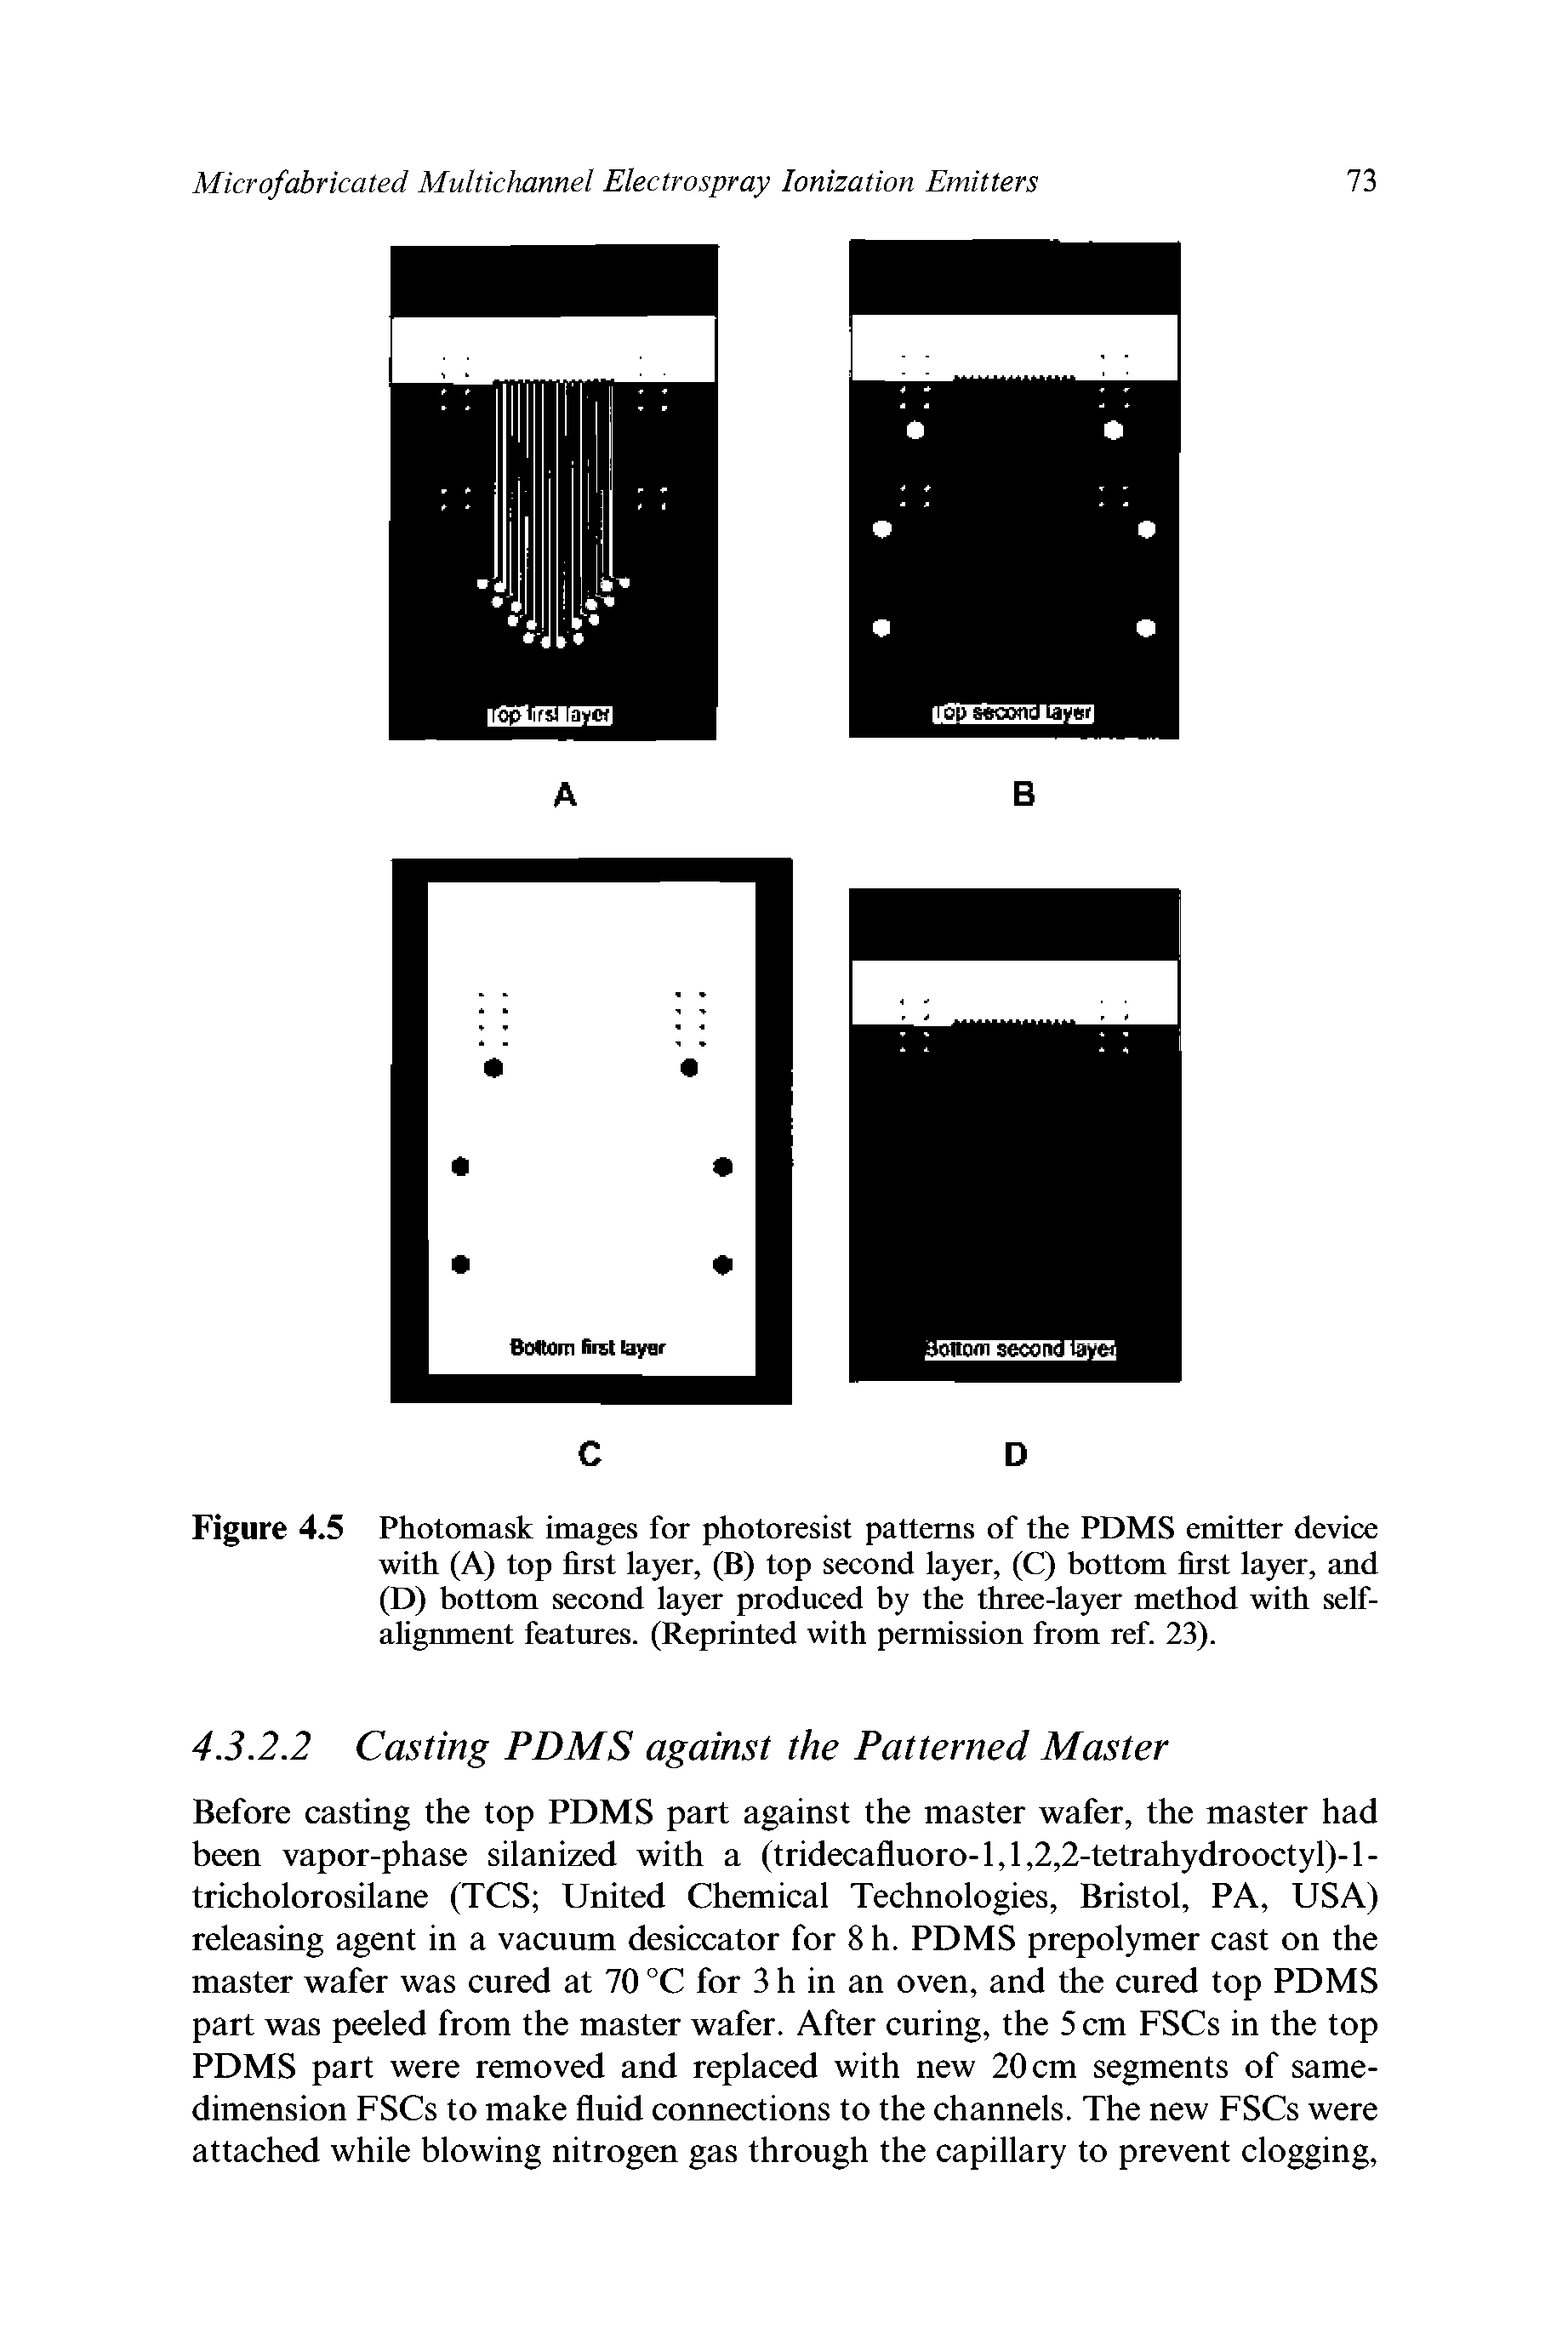 Figure 4.5 Photomask images for photoresist patterns of the PDMS emitter device with (A) top first layer, (B) top second layer, (C) bottom first layer, and (D) bottom second layer produced by the three-layer method with selfalignment features. (Reprinted with permission from ref. 23).